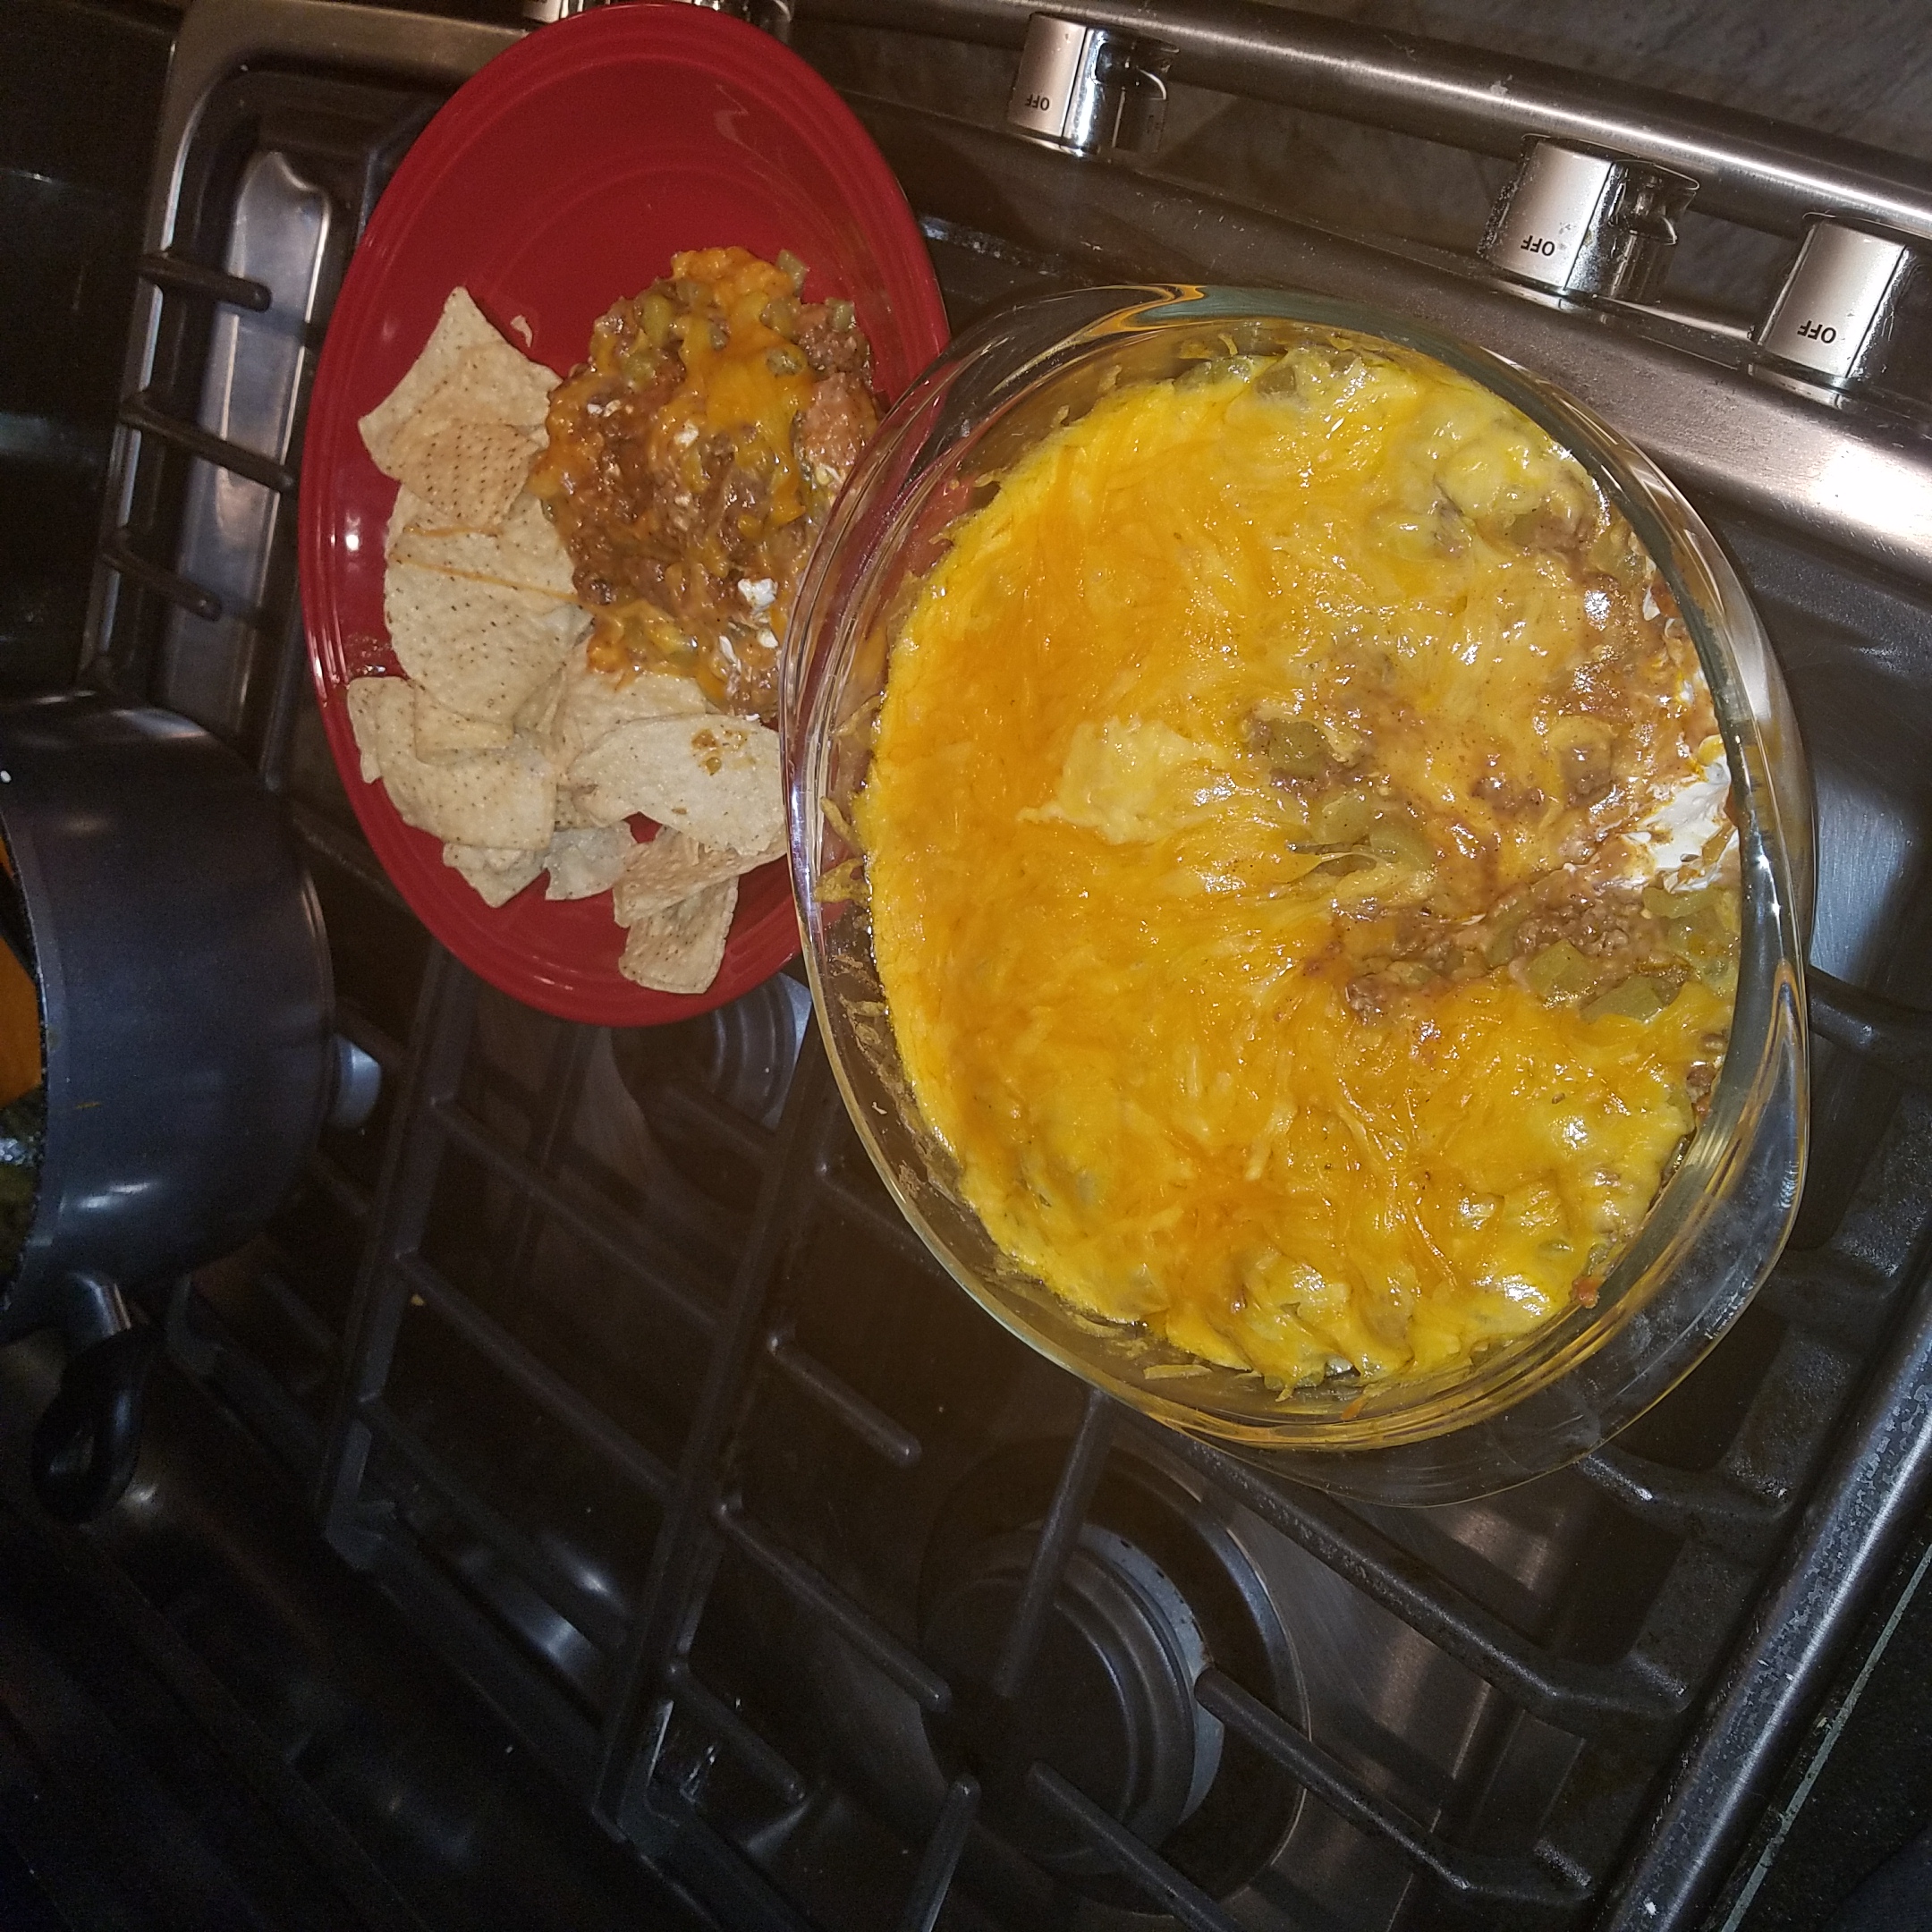 New Mexico Green Chile Dip